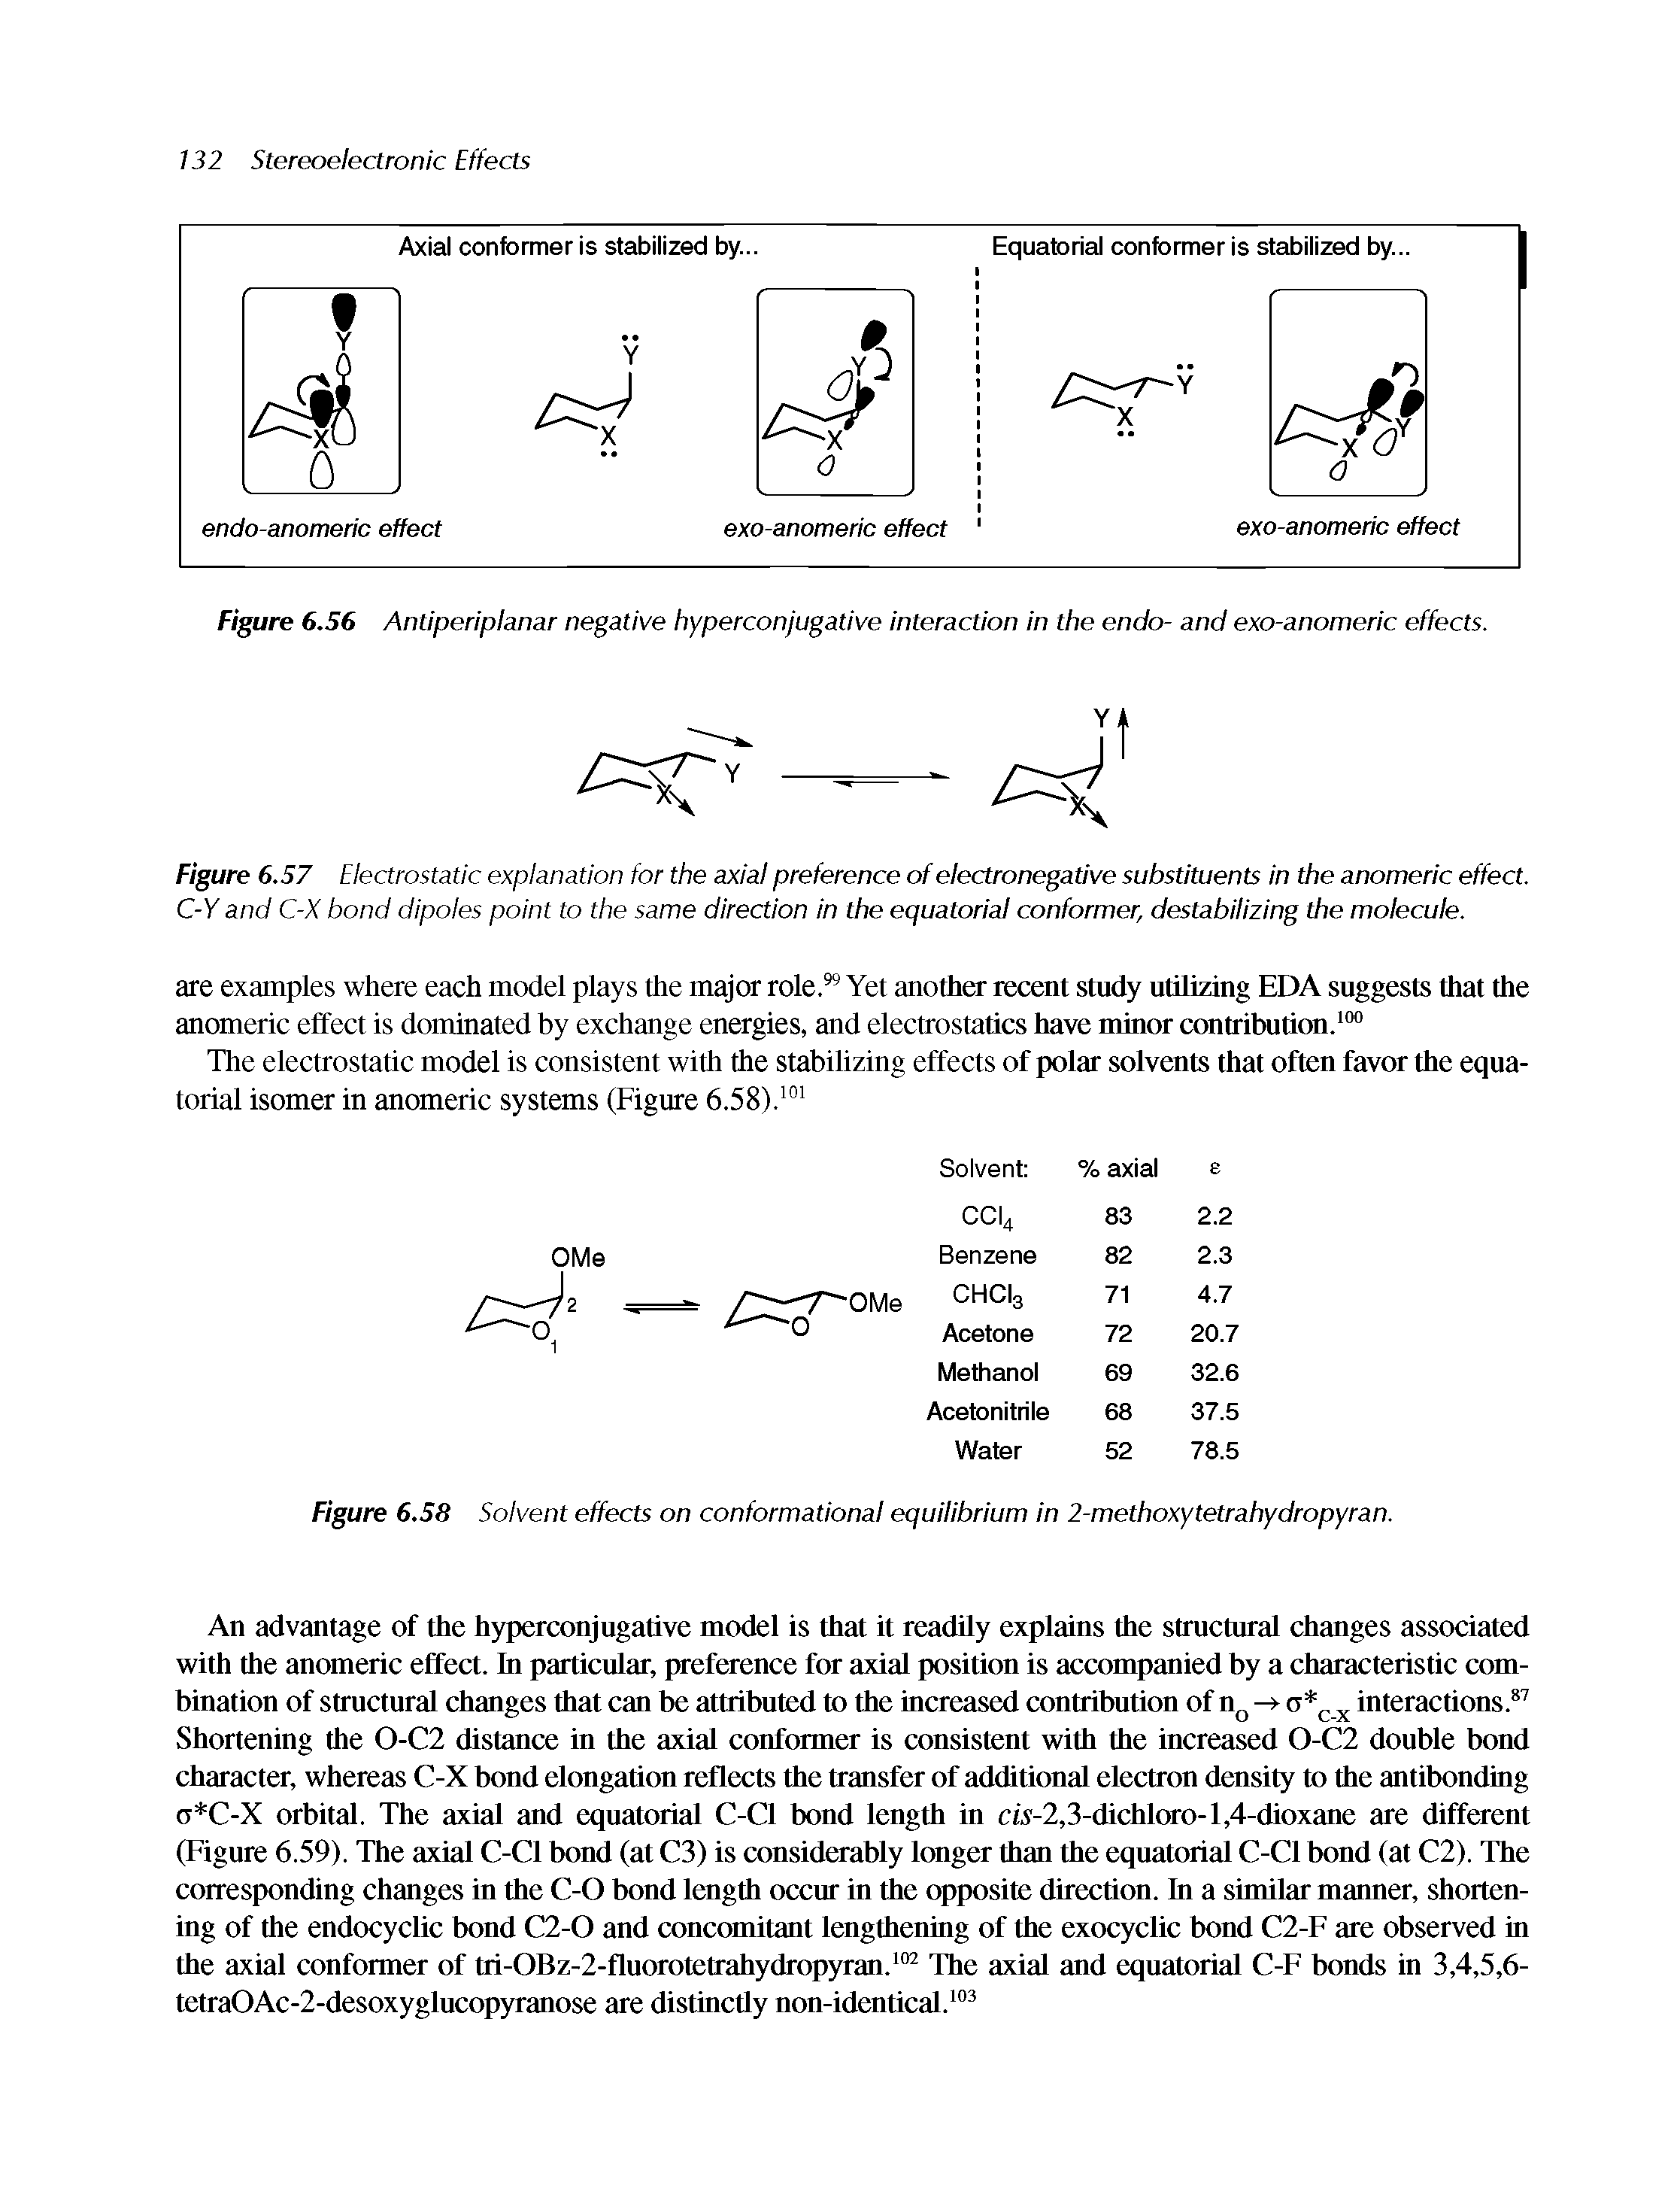 Figure 6.57 Electrostatic explanation for the axial preference of electronegative substituents in the anomeric effect. C-Y and C-X bond dipoles point to the same direction in the equatorial conformer, destabilizing the molecule.